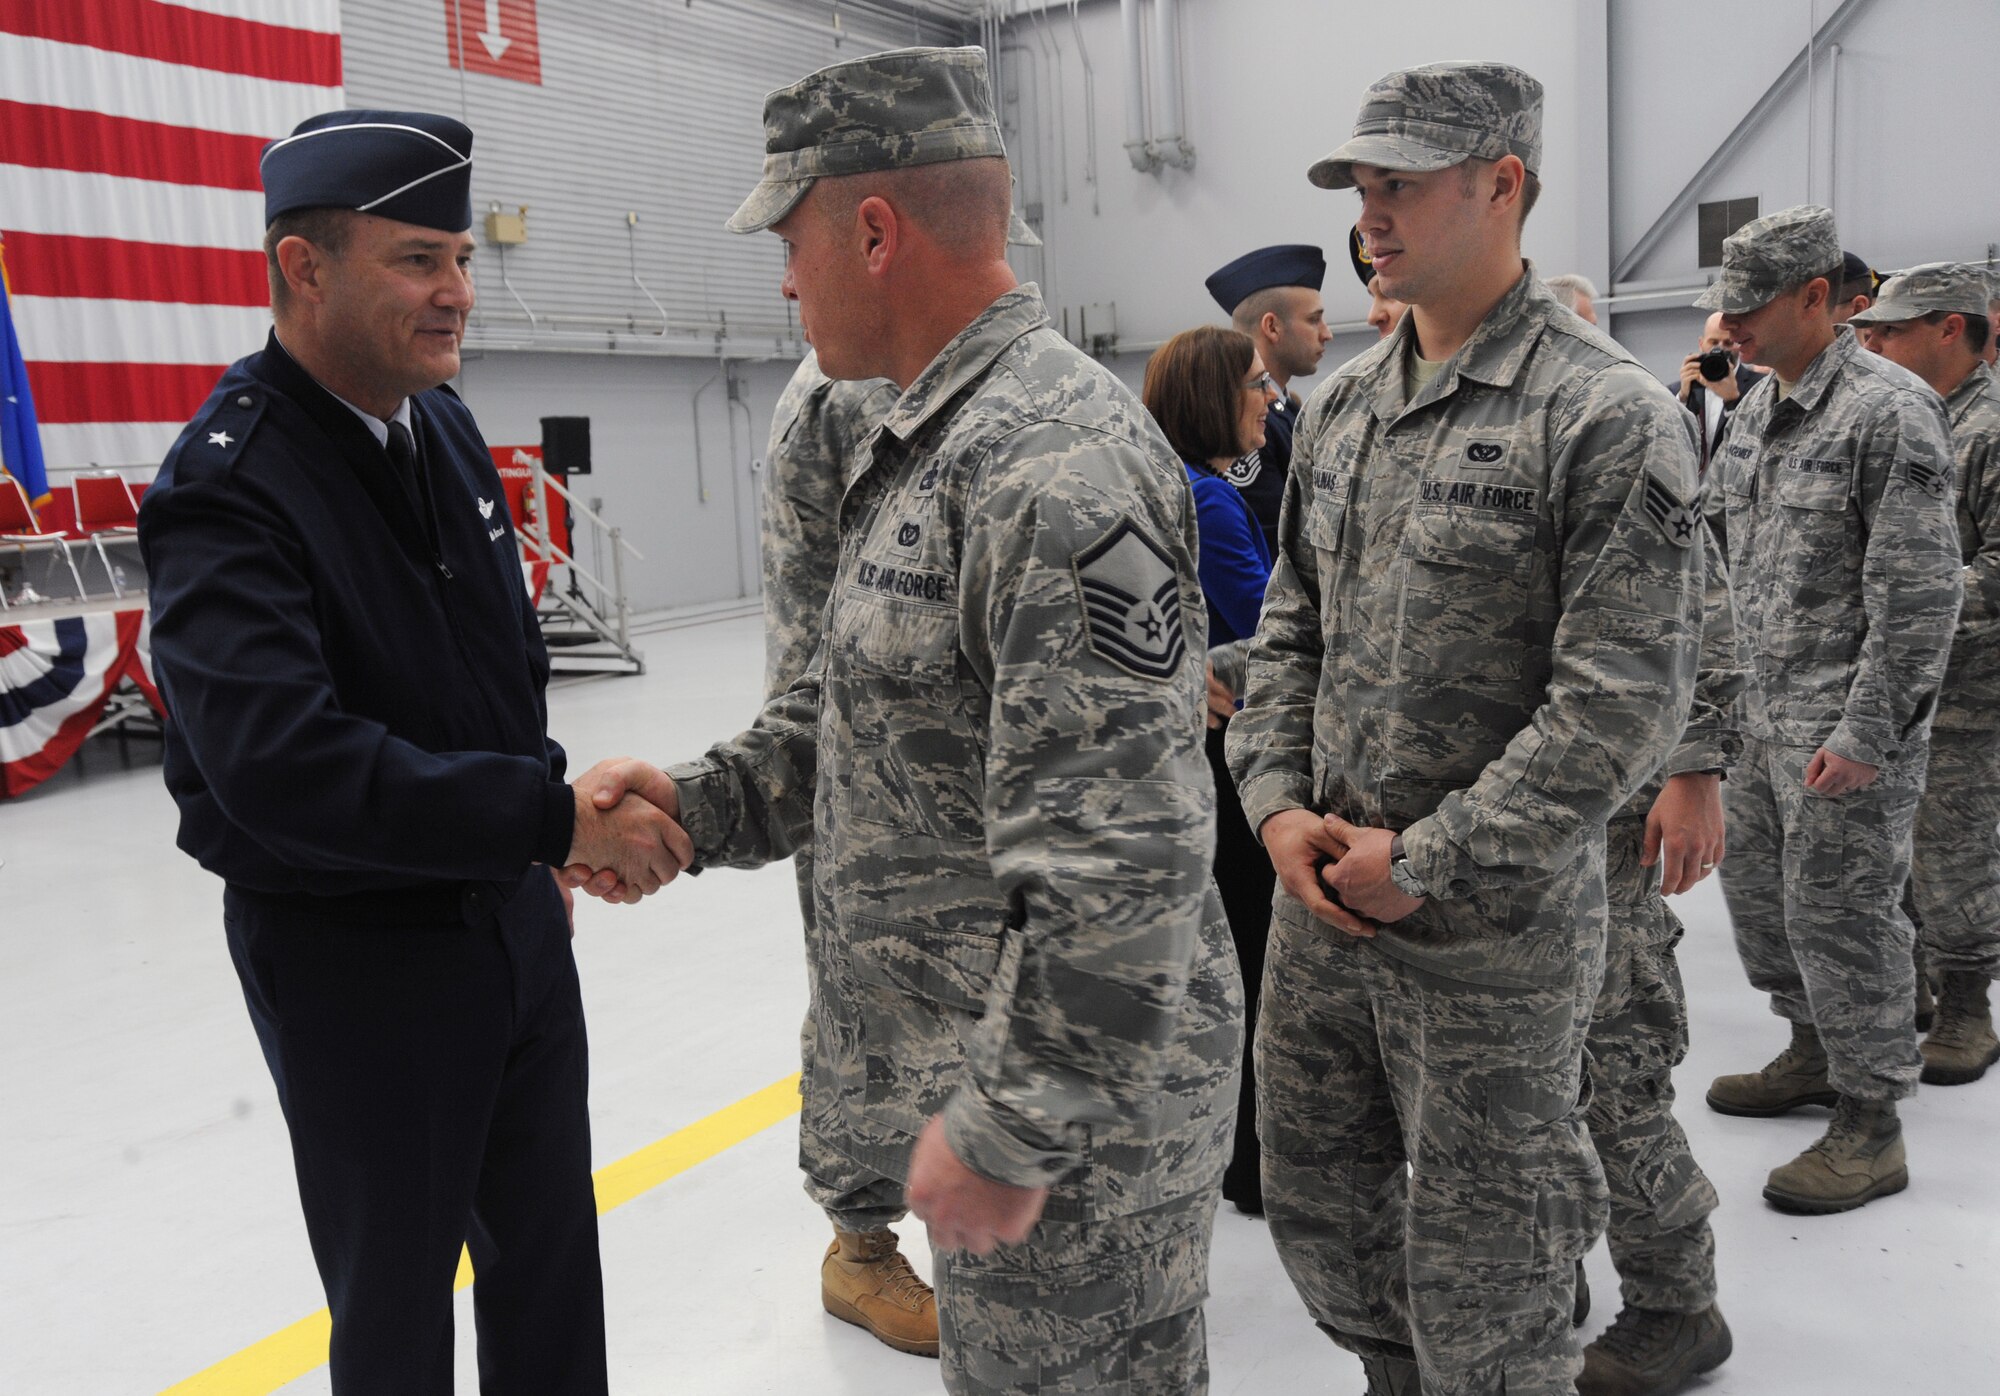 Brig. Gen. Michael Stencel, Oregon Air National Guard Commander, left, greets Airmen from the 142nd Fighter Wing Civil Engineer Squadron and Security Forces Squadron after the formal Demobilization Ceremony at the Portland Air National Guard Base, Ore., Dec. 7, 2014. (U.S. Air National Guard photo by Tech. Sgt. John Hughel, 142nd Fighter Wing Public Affairs/Released)